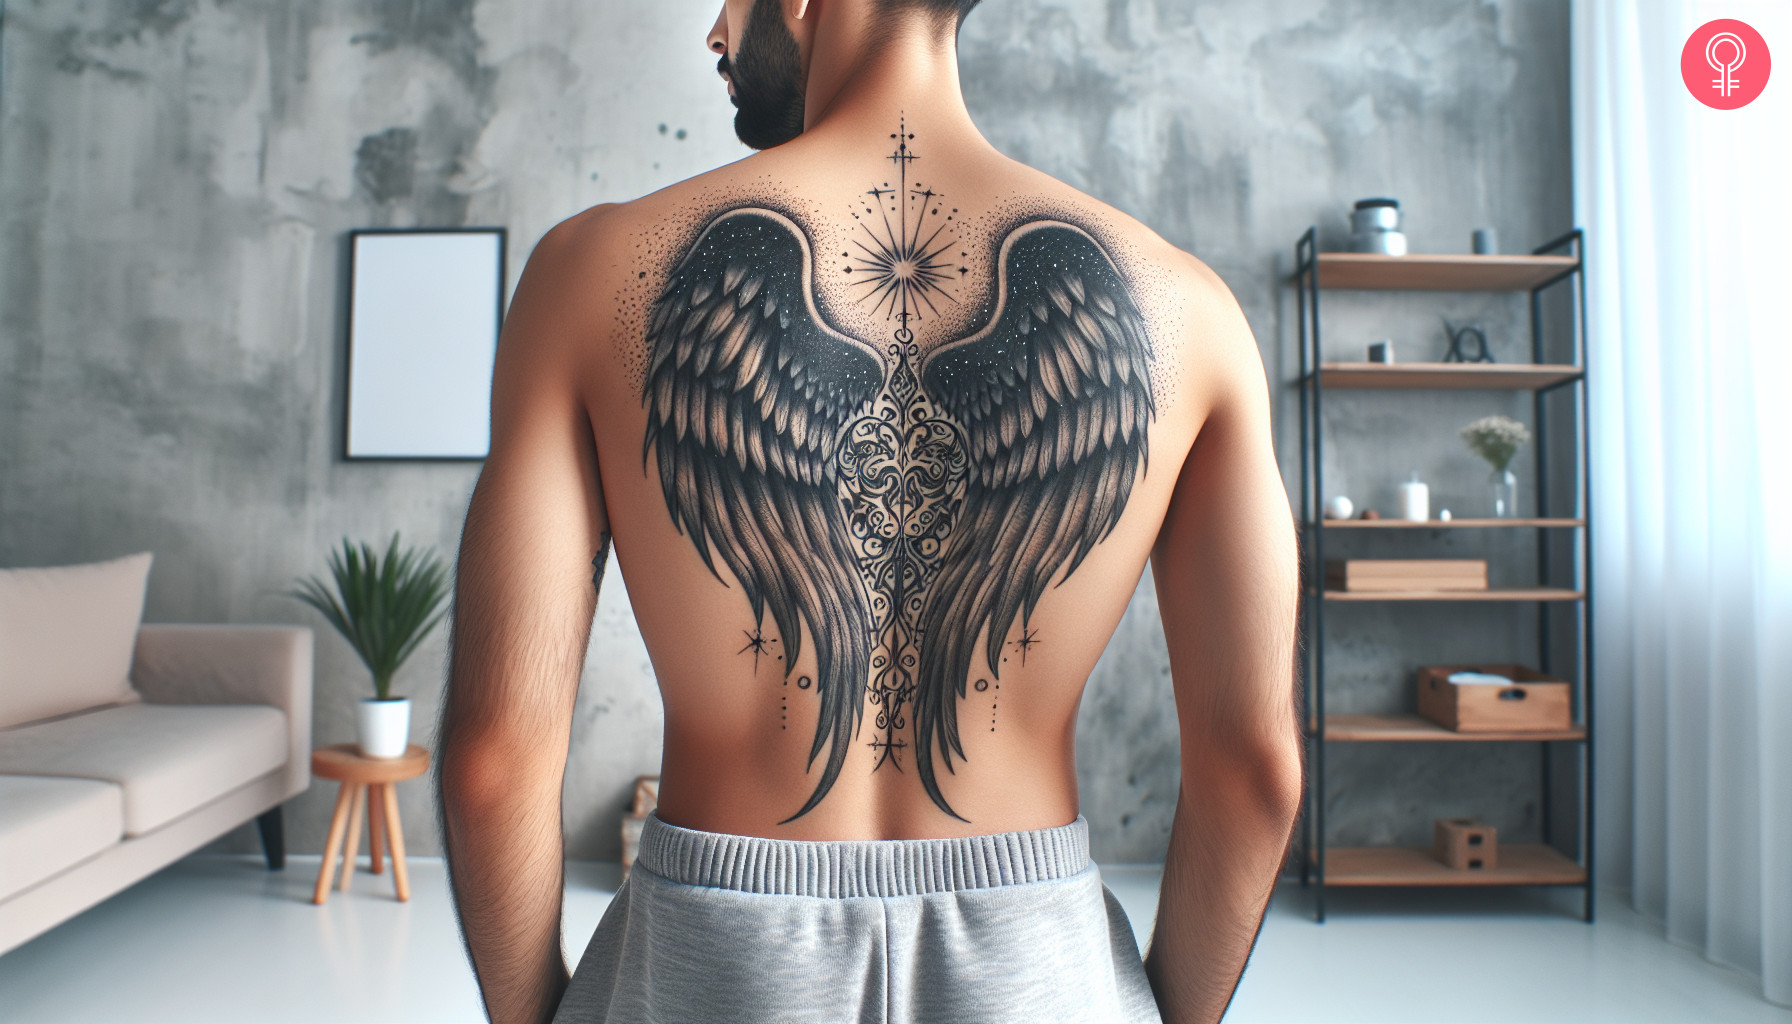 A pair of hermes wings tattoo on the back of a man